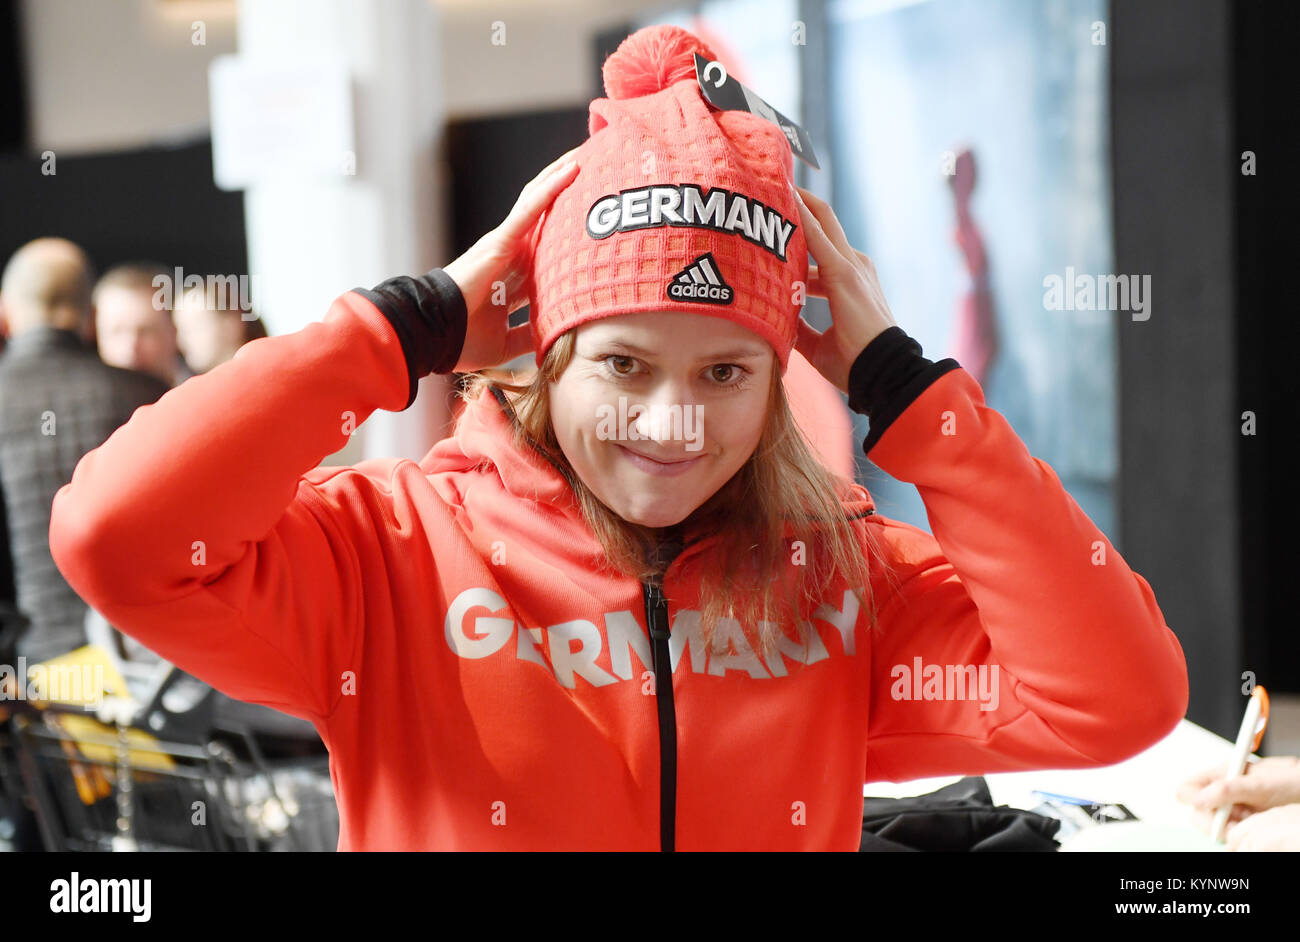 Munich, Germany. 15th Jan, 2018. The ski racer Viktoria Rebensburg puts on  a hat during the official outfitting of the German Olympic Team for the  Winter Olympics in Pyeongchang, South Korea, in